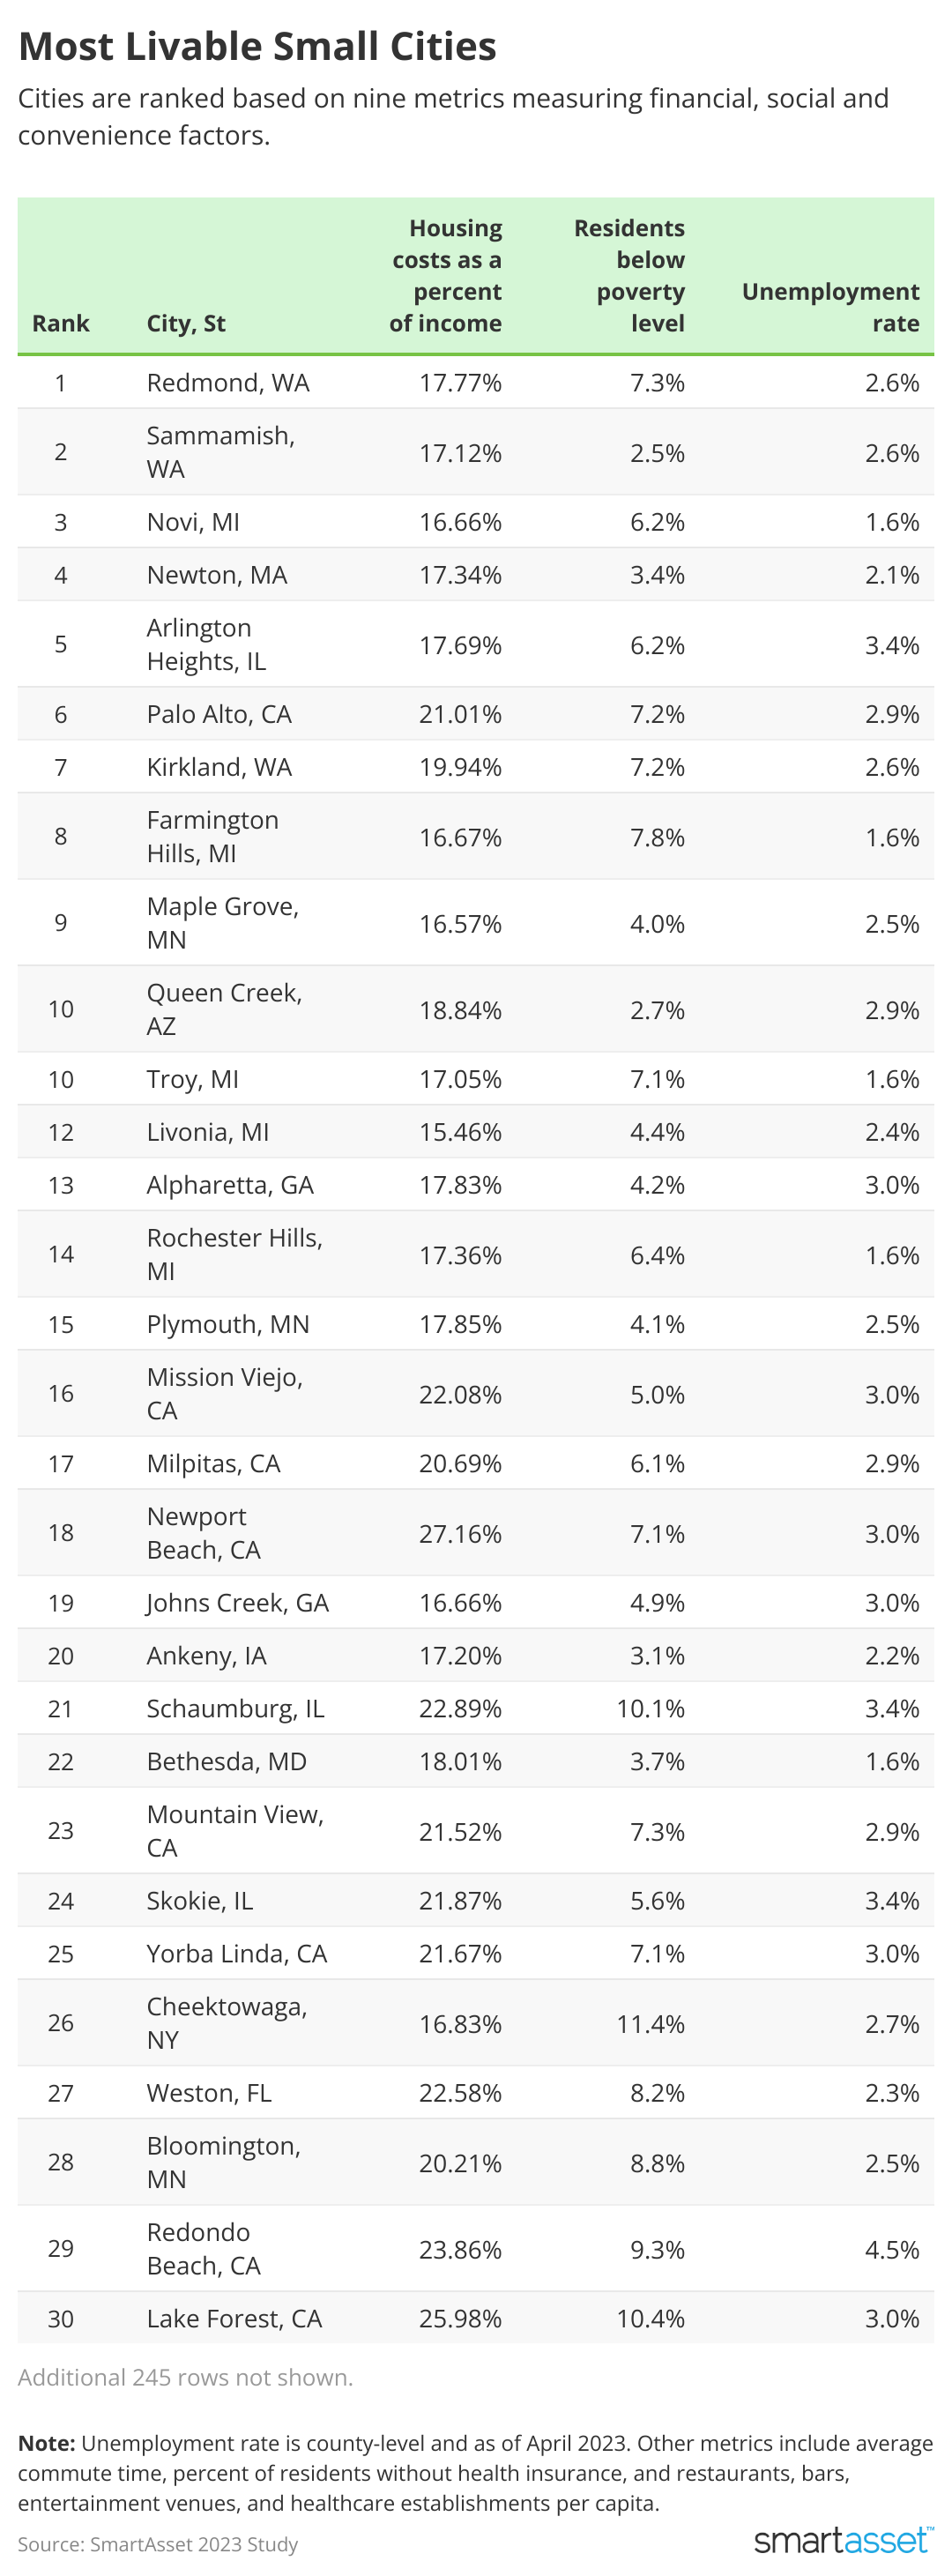 Table showing the most livable small cities in the United States.